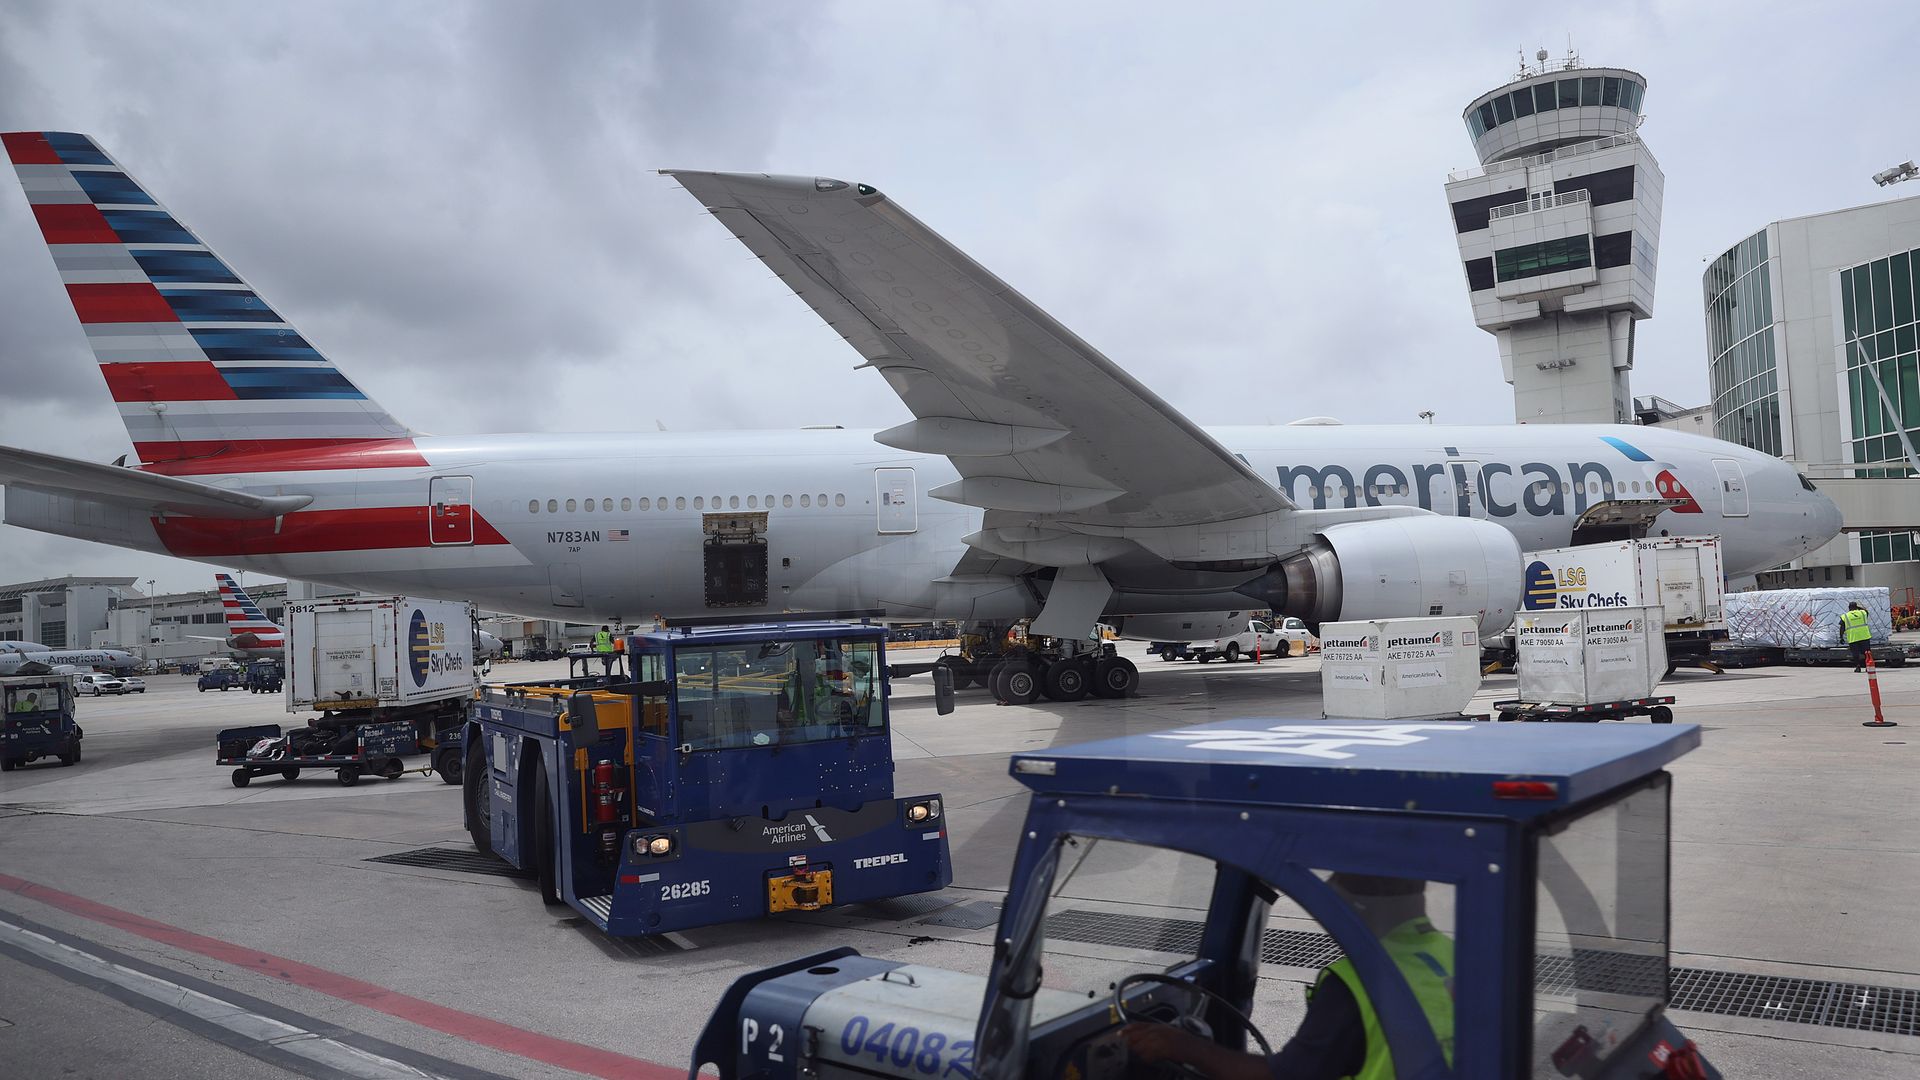 Workers prepare an American Airlines plane at a gate before its flight from the Miami International Airport on June 16, 2021 in Miami, Florida. 